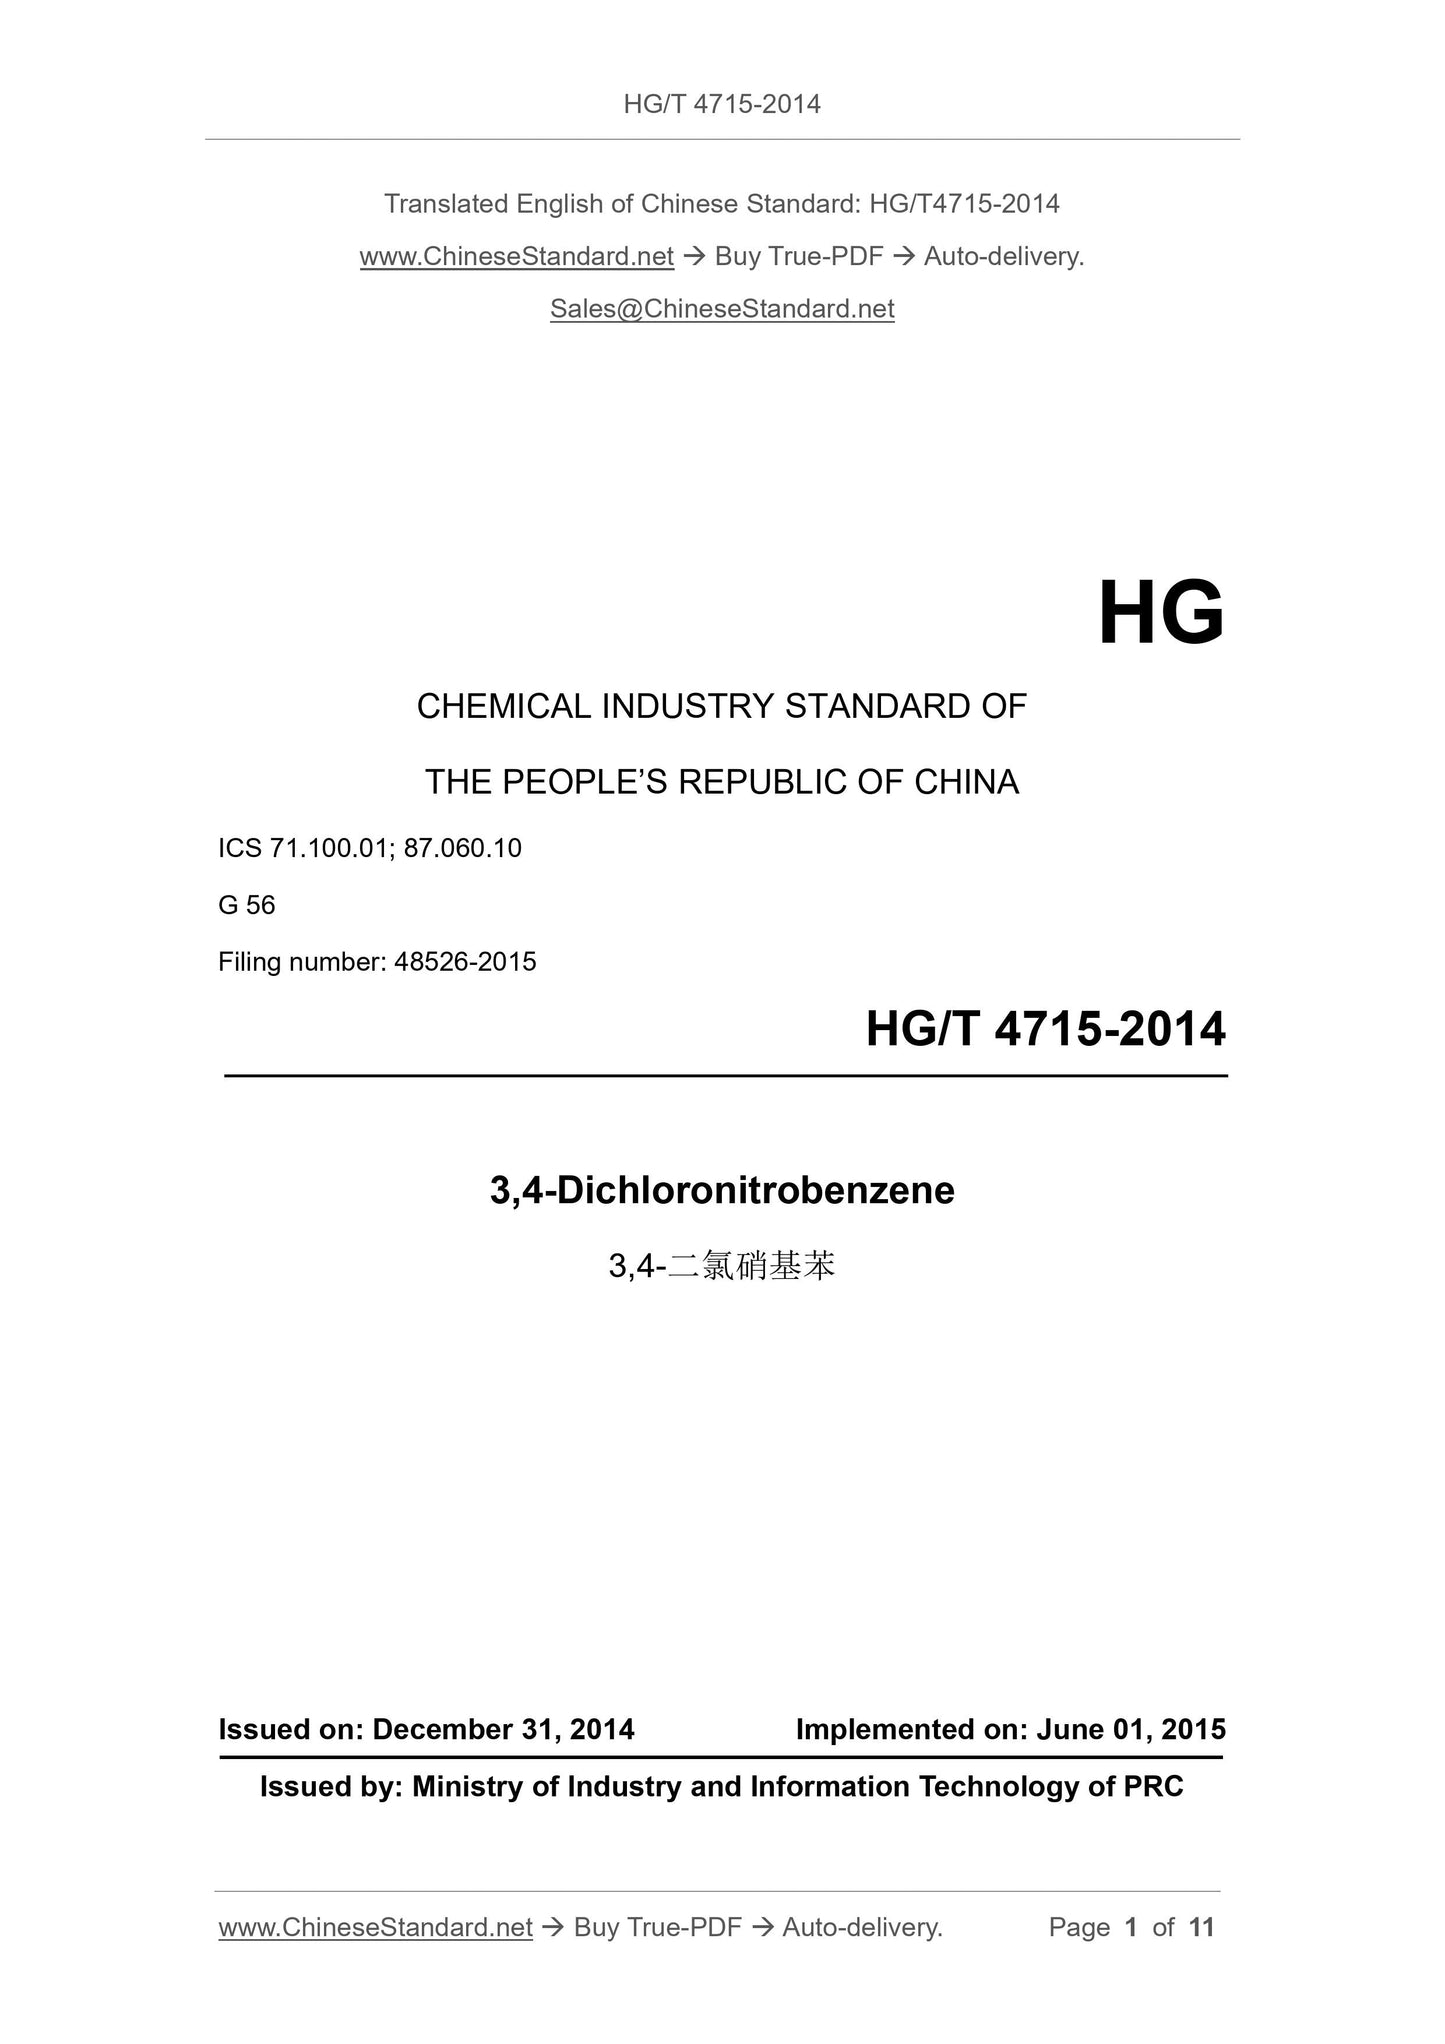 HG/T 4715-2014 Page 1